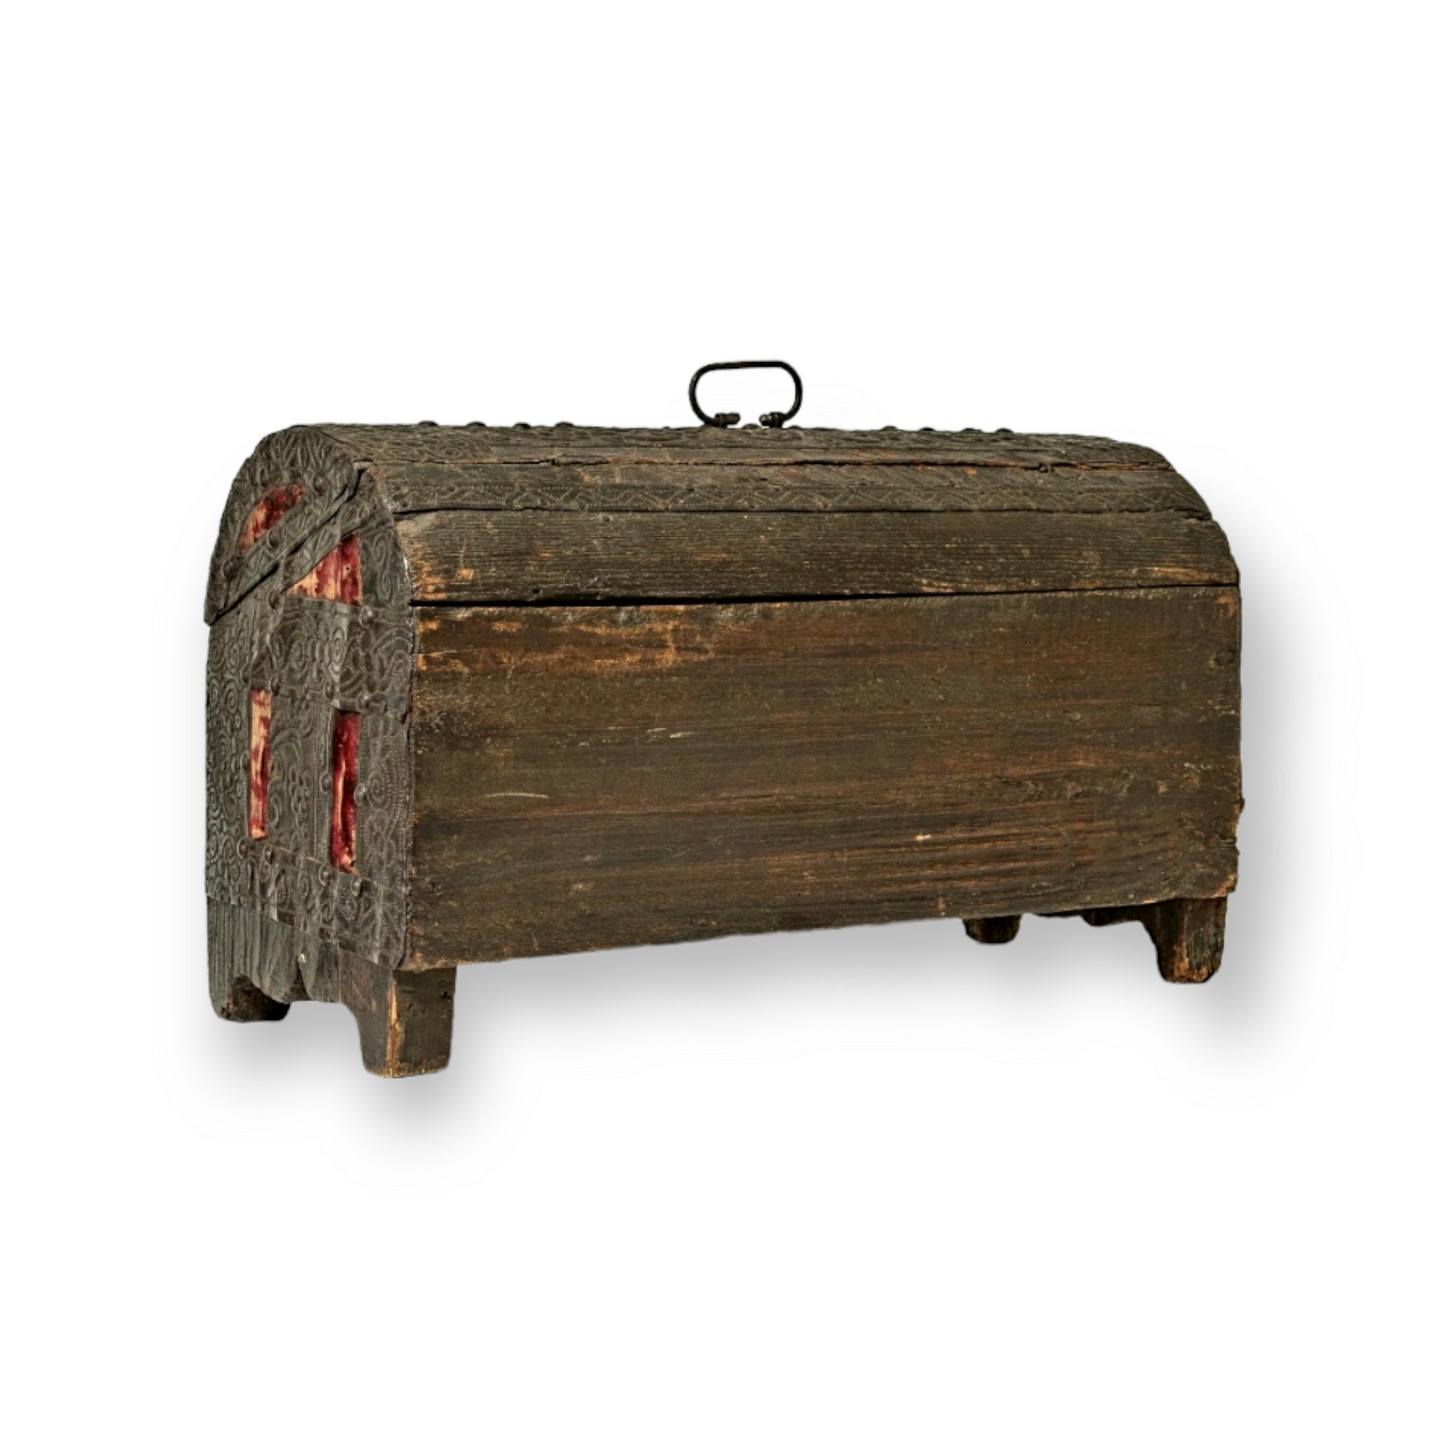 A 17th Century Iberian Antique Repousee-Worked Sheet Iron And Velvet Covered Table Casket, Circa 1650-90